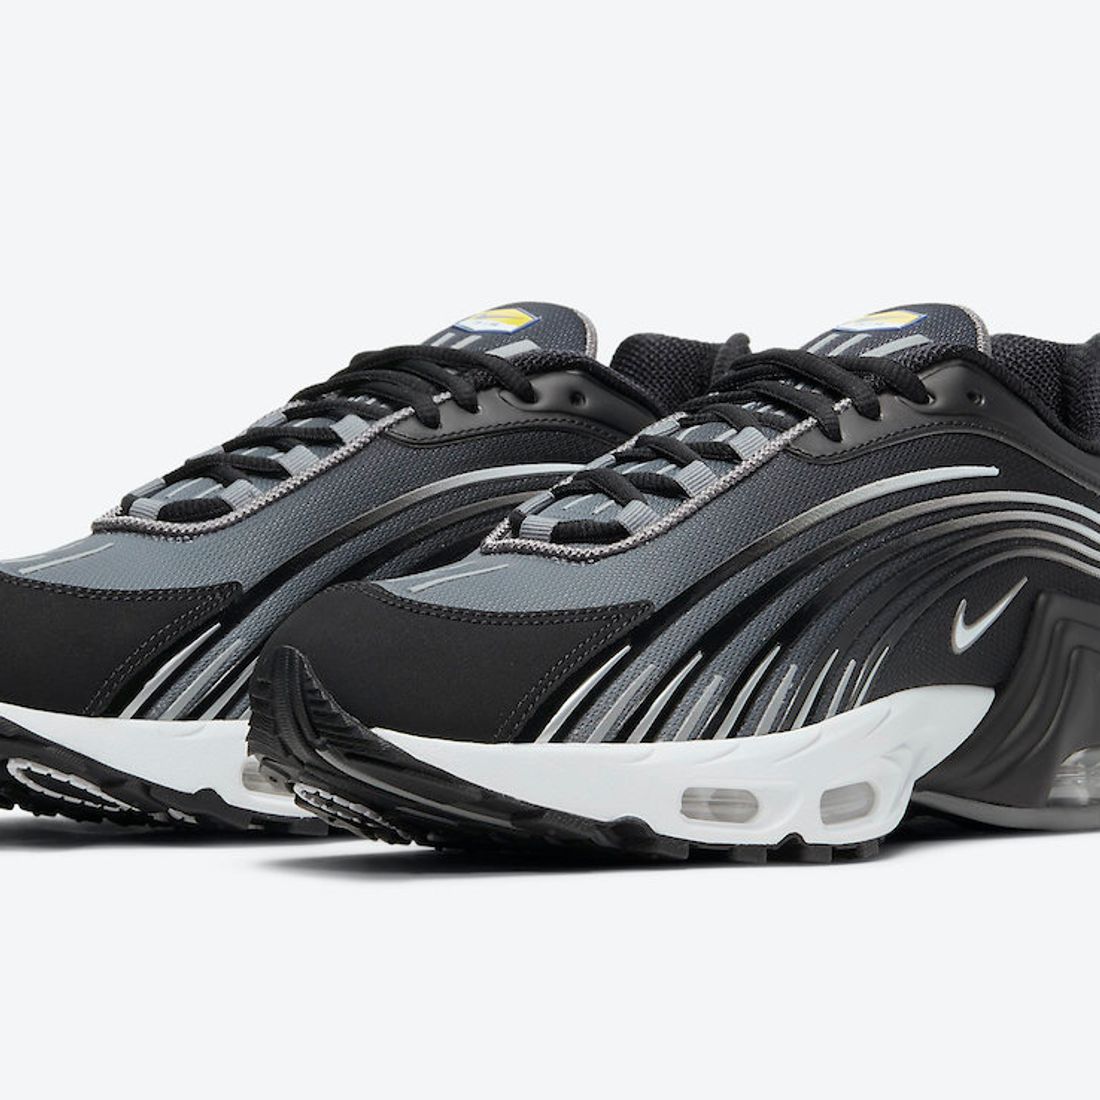 Sunny jewelry Ideal Take a Closer Look at the 'Smoke Grey' Nike Air Max Plus 2 - Sneaker Freaker